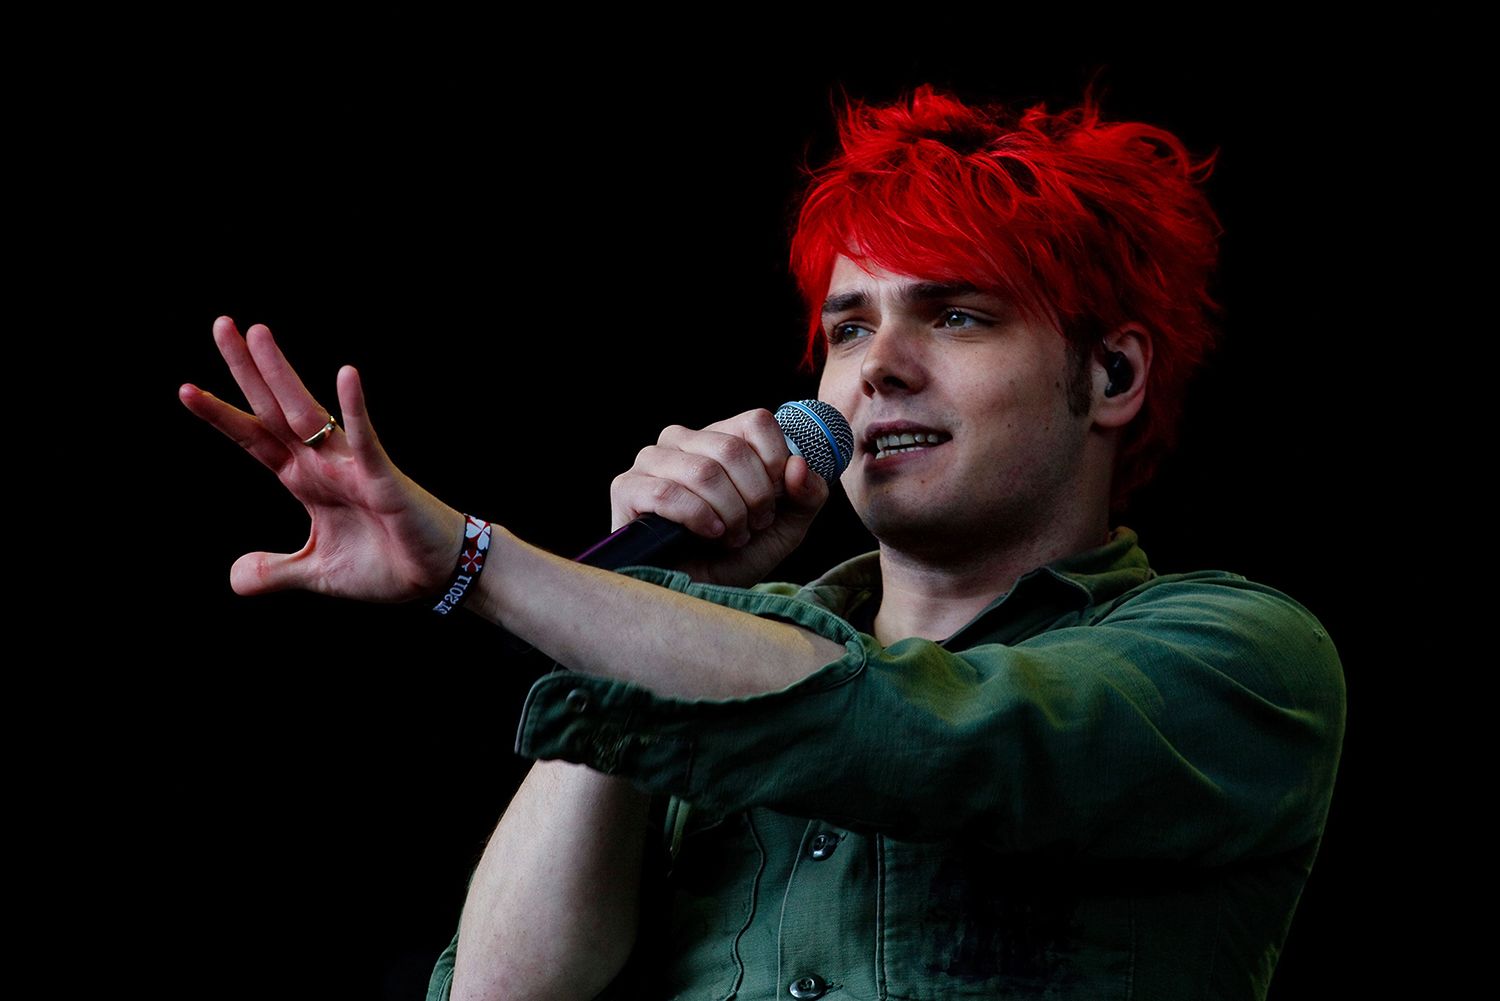 Minimer Skulle let Ο χρήστης Music Poster στο Twitter: "😎🎸My Chemical Romance's Gerard Way  singing on stage at the T in the Park Festival, Scotland, 2011. Love the red  hair! 😍😍 Just arrived on our